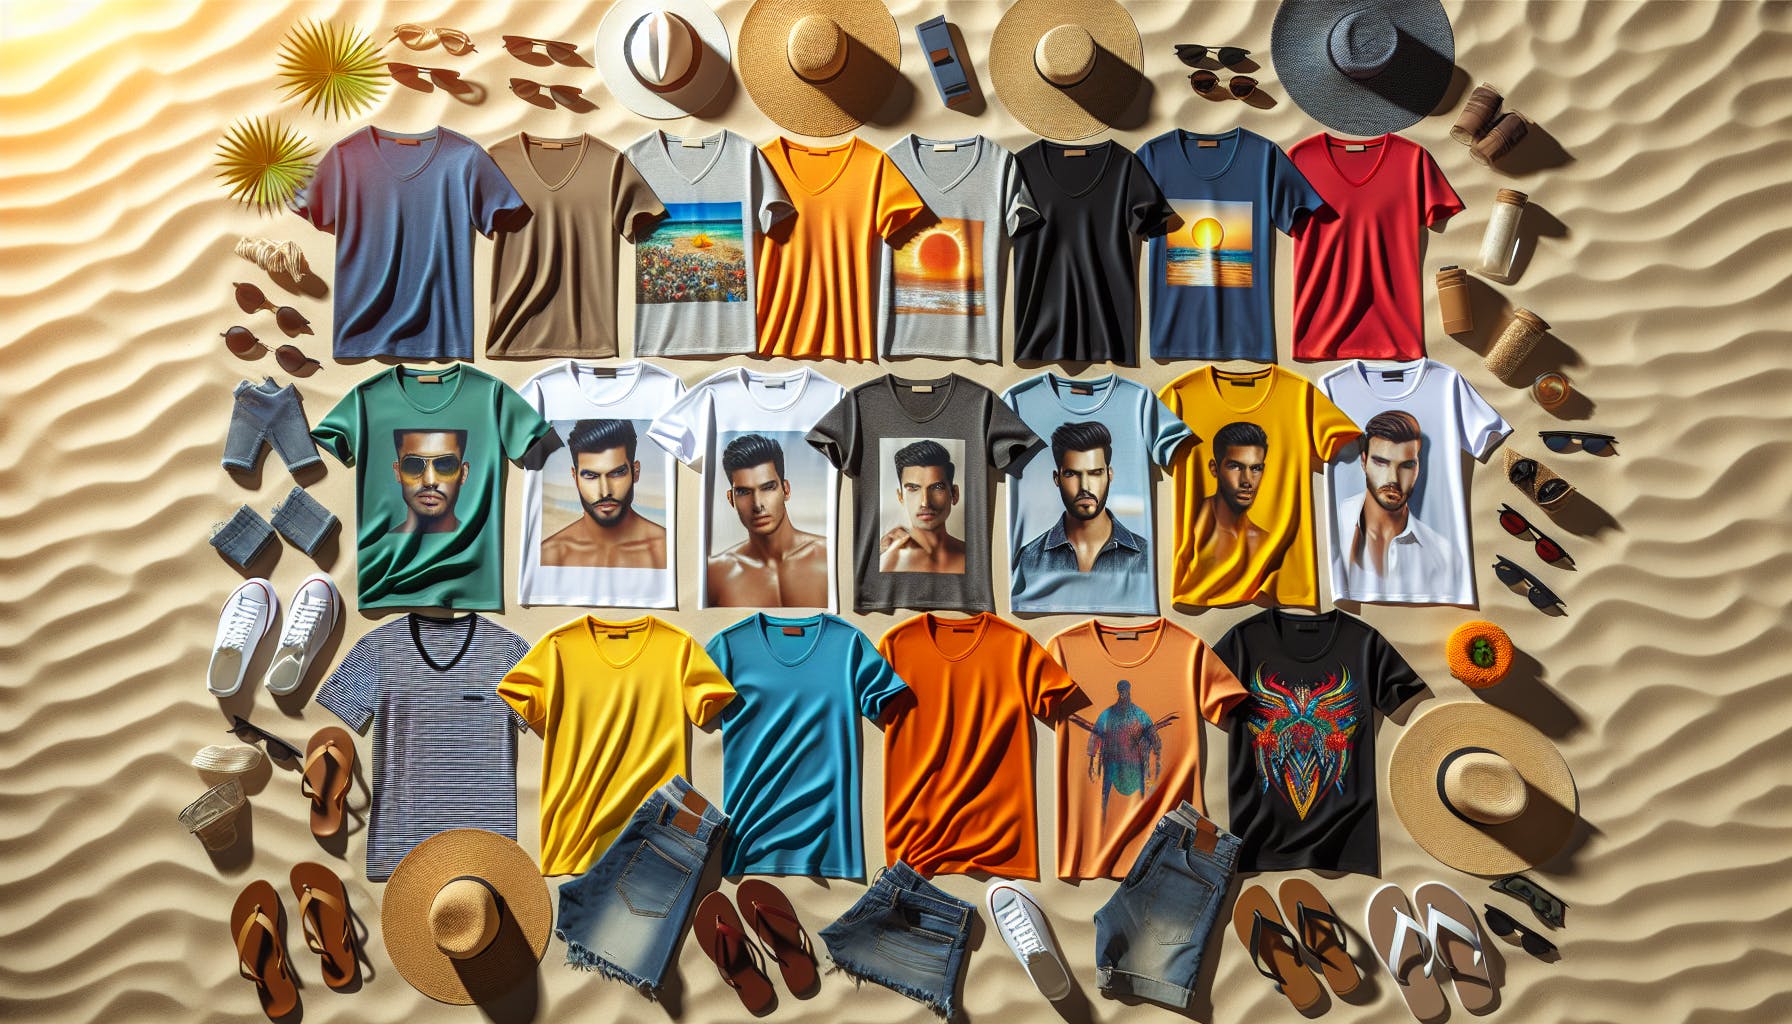 Essentials of Summer: The Guide to Men's T-Shirts. An image showing an array of fashionable men's summer t-shirts in vibrant colors and various designs, displayed neatly on a backdrop of a sunny, sandy beach. The shirts range from simple, solid-color styles, to those with cool, graphic designs. Some have round necks, others v-necks and a few with collar. They represent different cultures with Asian, Caucasian, Hispanic, Black, and Middle-Eastern men modeling them. The image also features complementary summer accessories like sunglasses, beach hats, and flip-flops scattered around.